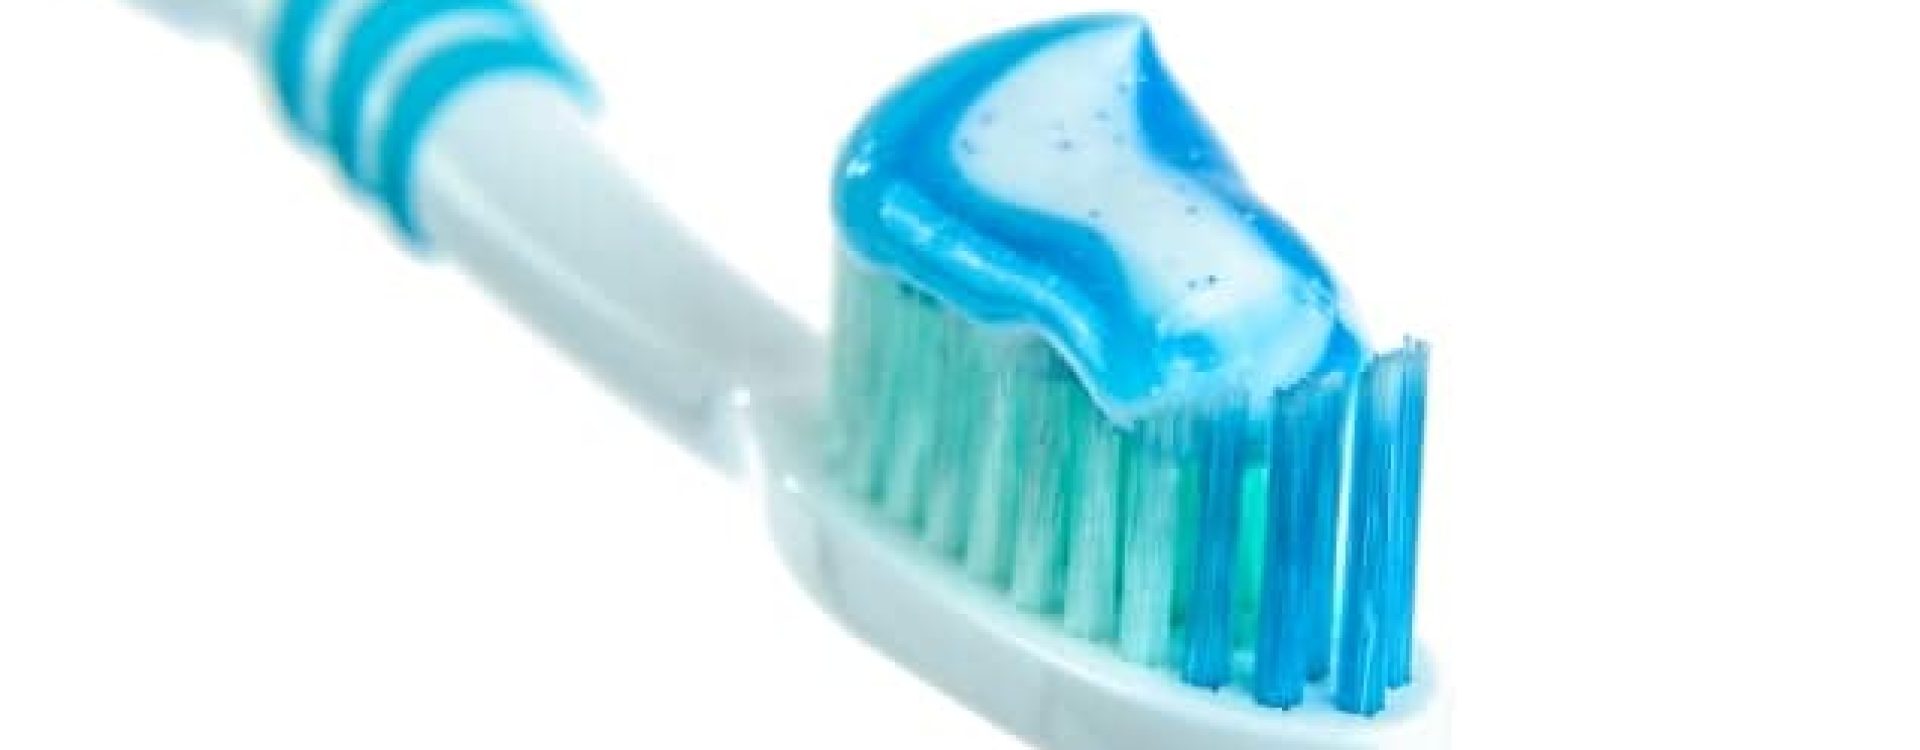 intro-toothbrush-toothpaste